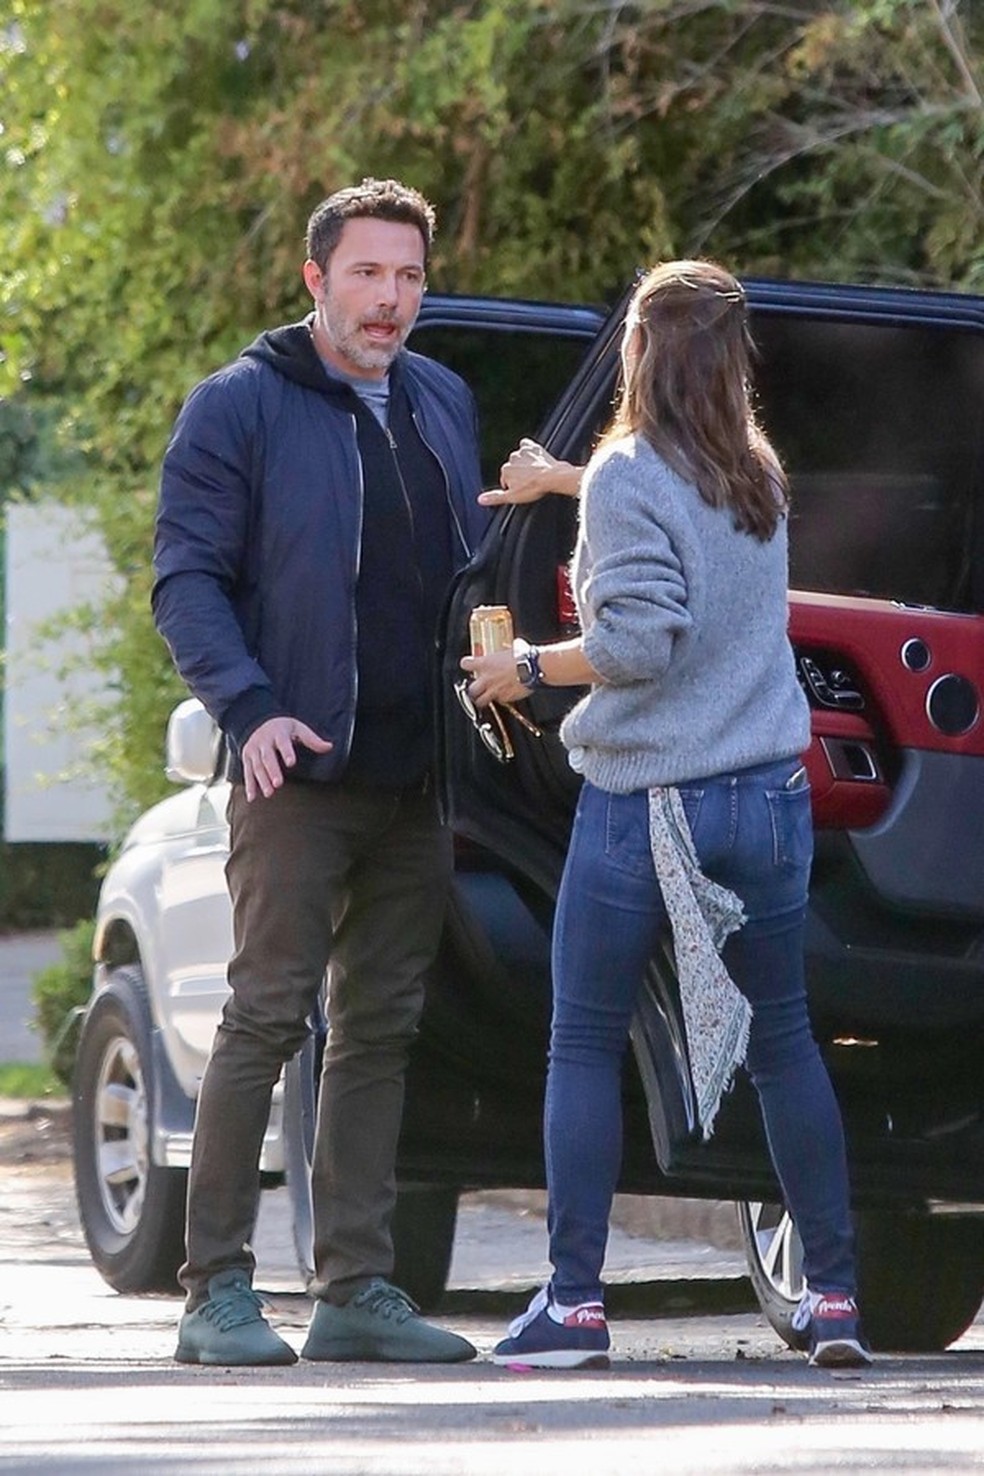 Brentwood, CA - *EXCLUSIVE* Ex's Ben Affleck and Jennifer Garner have a tense conversation outside her house. The former husband and wife drove away on Ben's Range Rover with Jen on the driver's seat while unhappy Ben hopped in on the passenger's seat. (Foto: BENS / BACKGRID) — Foto: Vogue